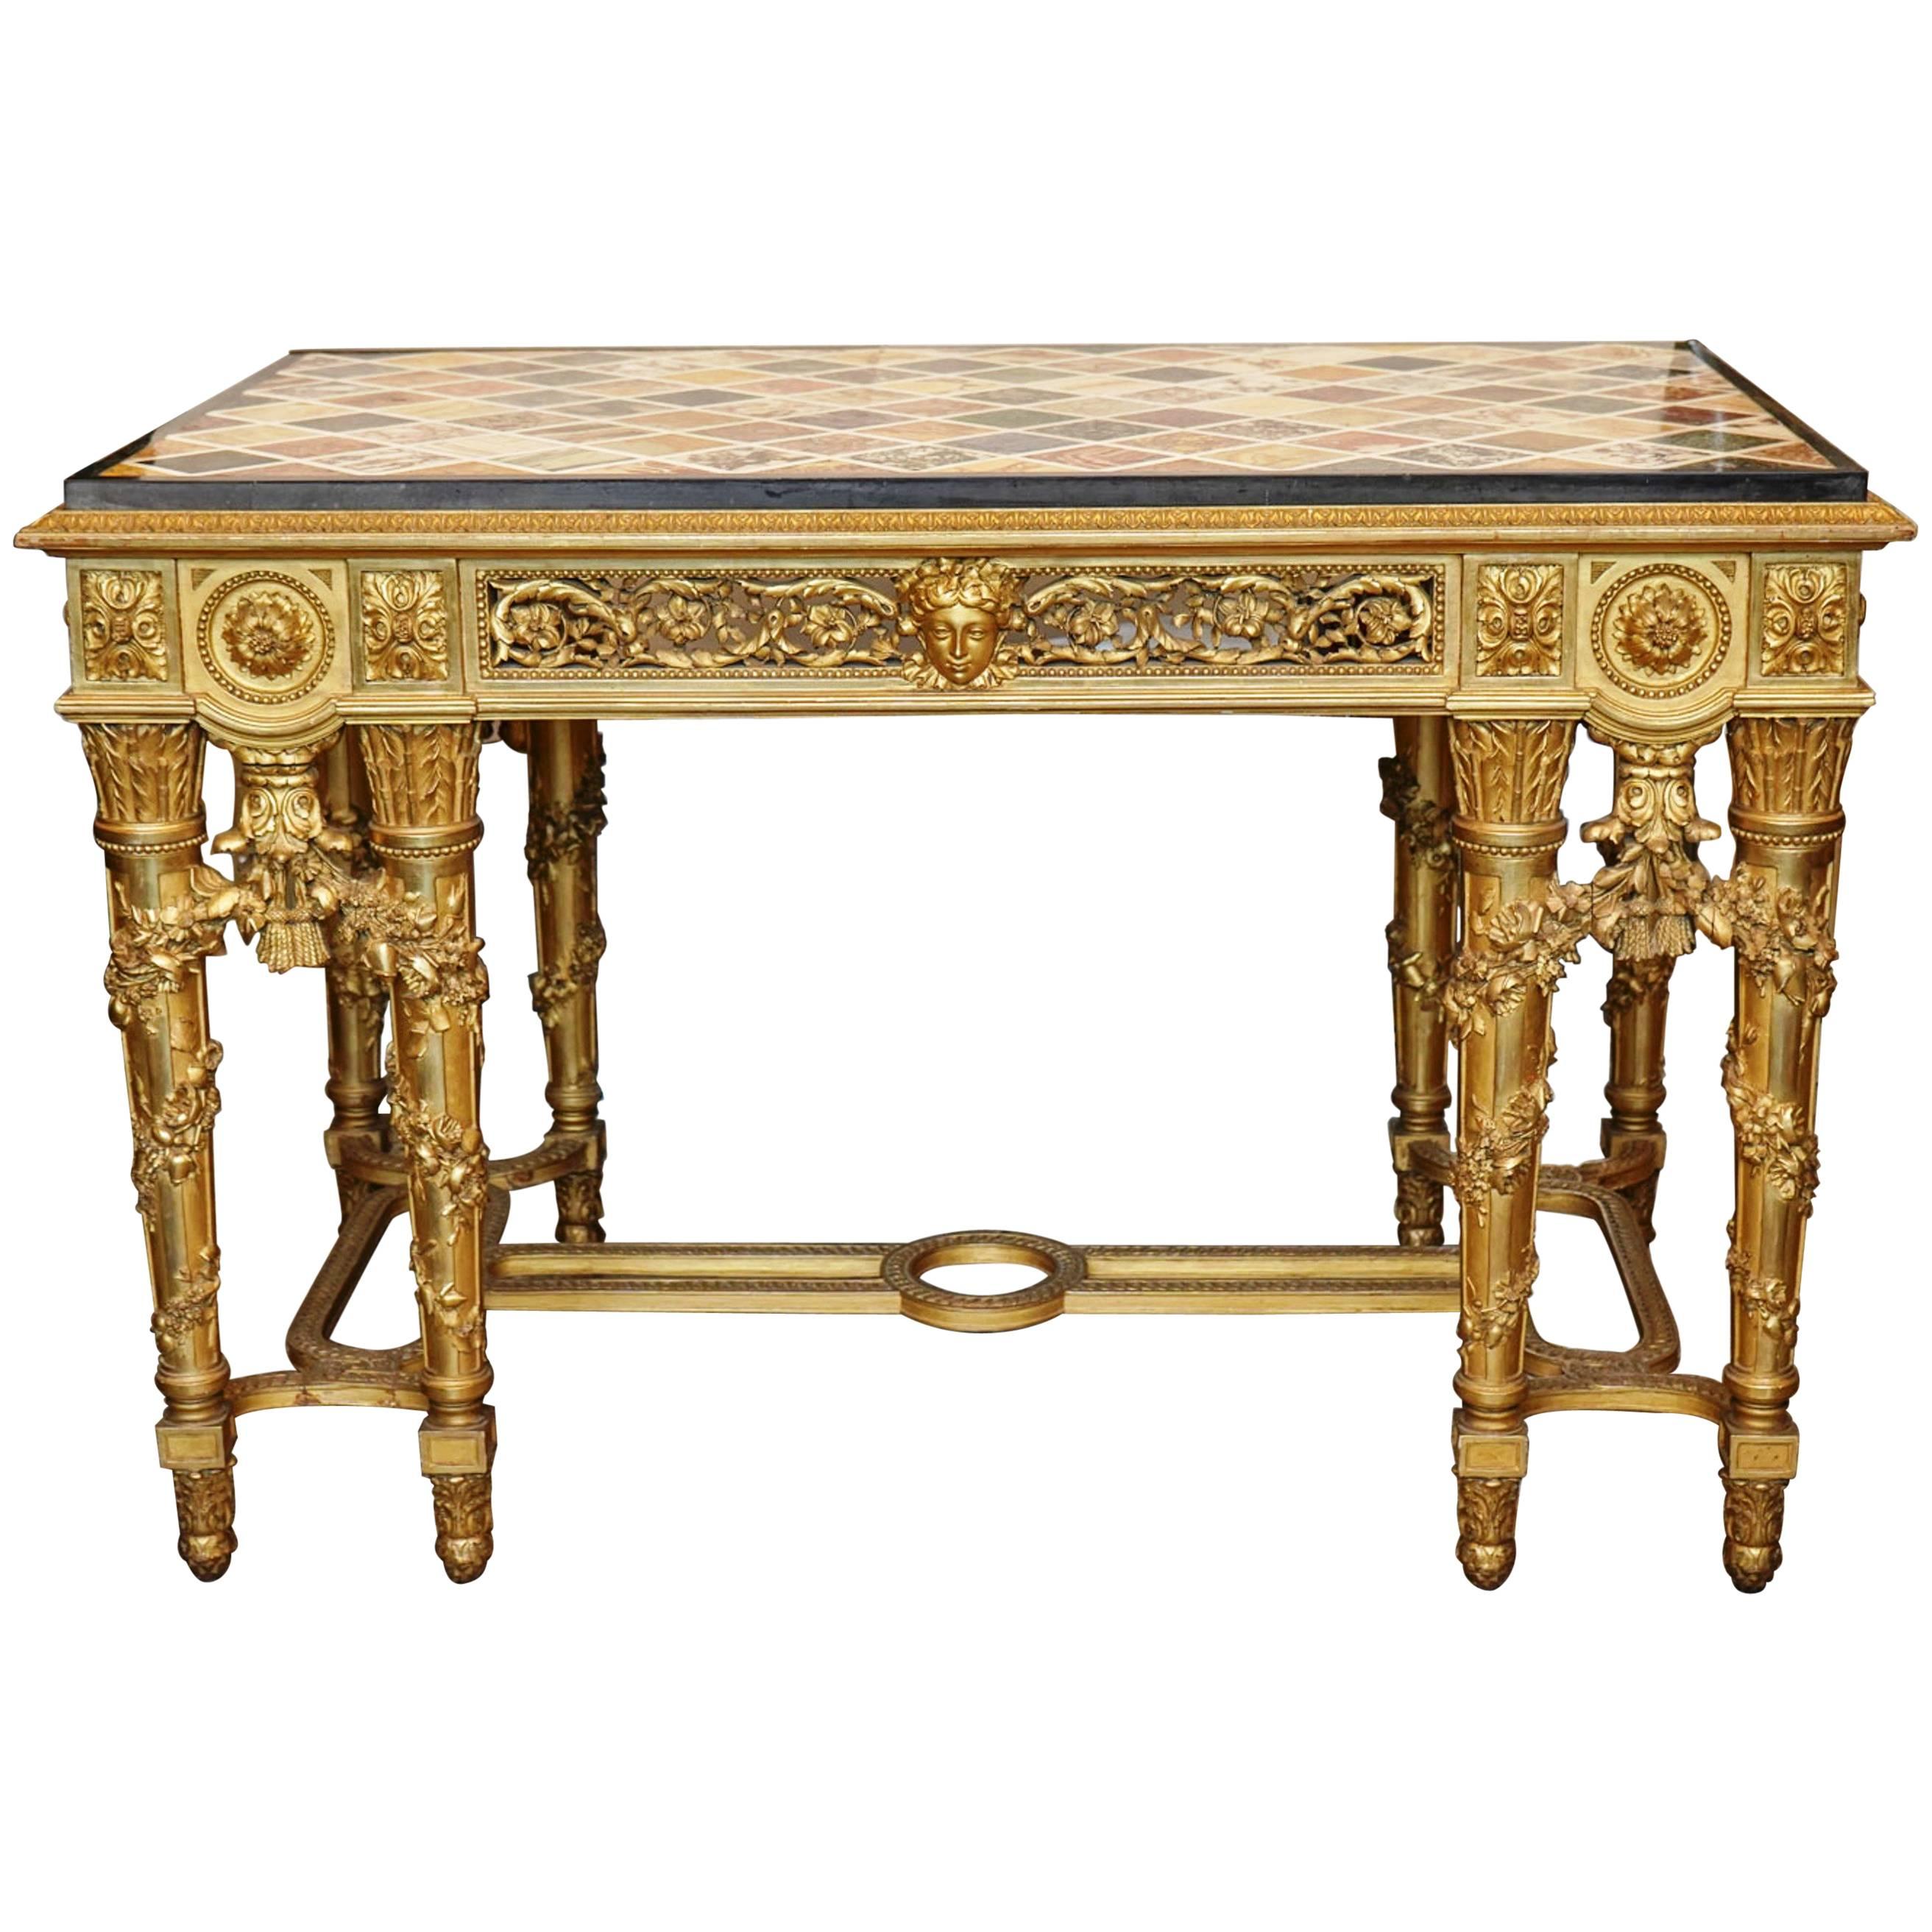 Extraordinary Rectangular Giltwood Centre Table 19th Century Marble Intarsia Top For Sale